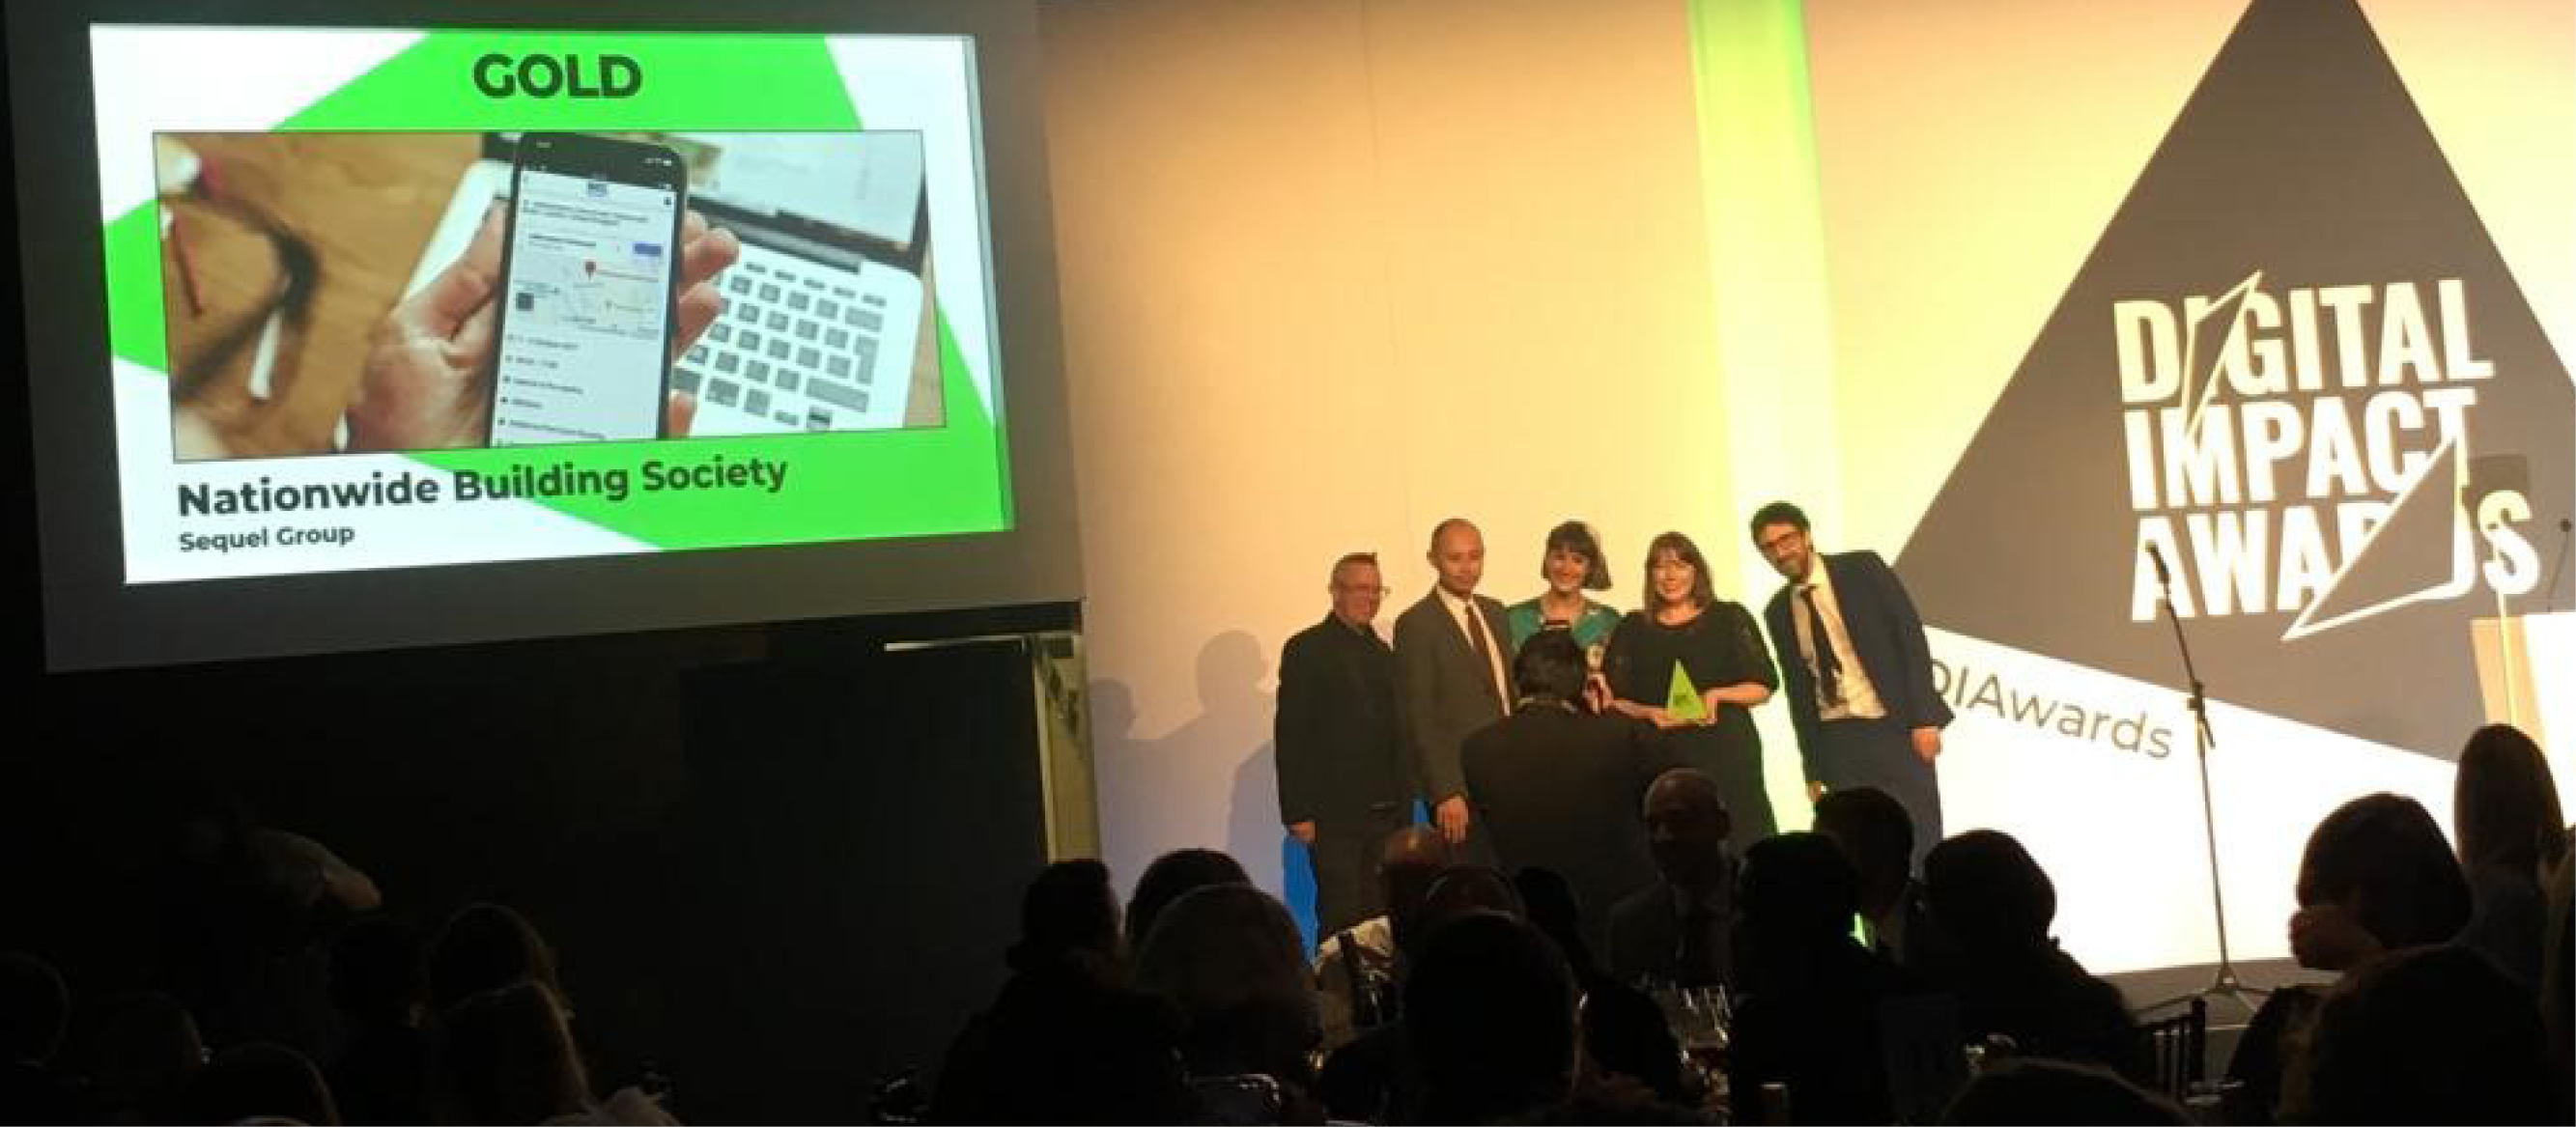 Sequel Group and Nationwide Building Society teams collecting the award for best employee engagement app on stage